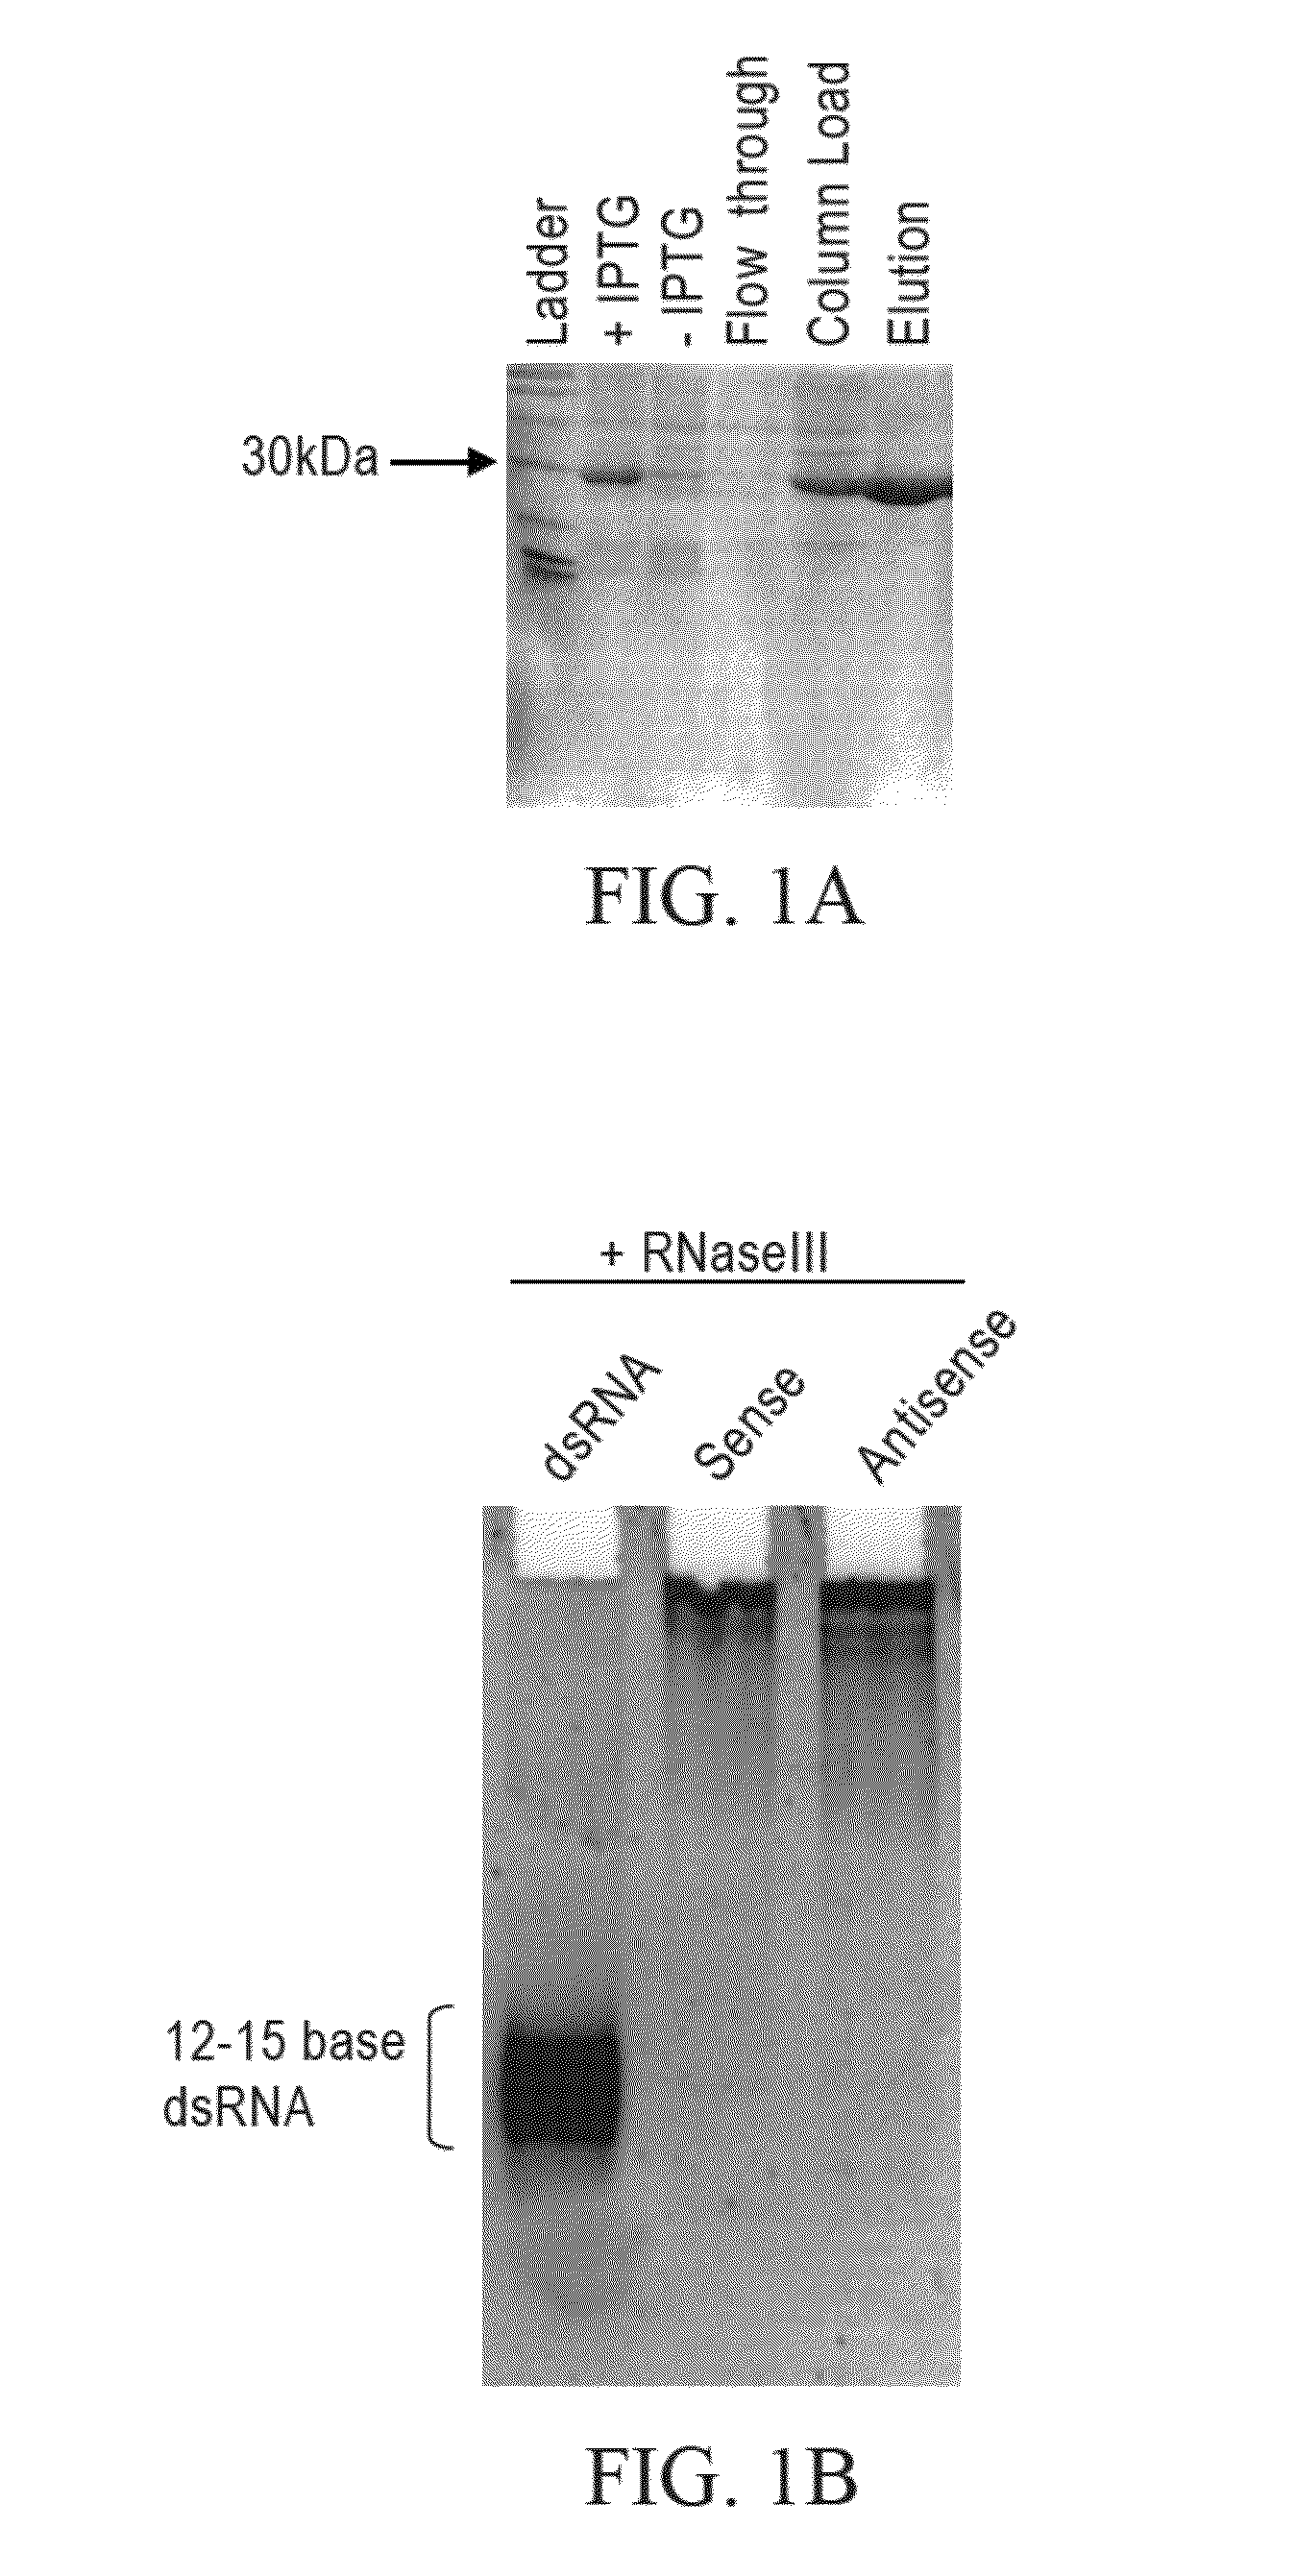 Methods and compositions relating to polypeptides with rnase iii domains that mediate RNA interference